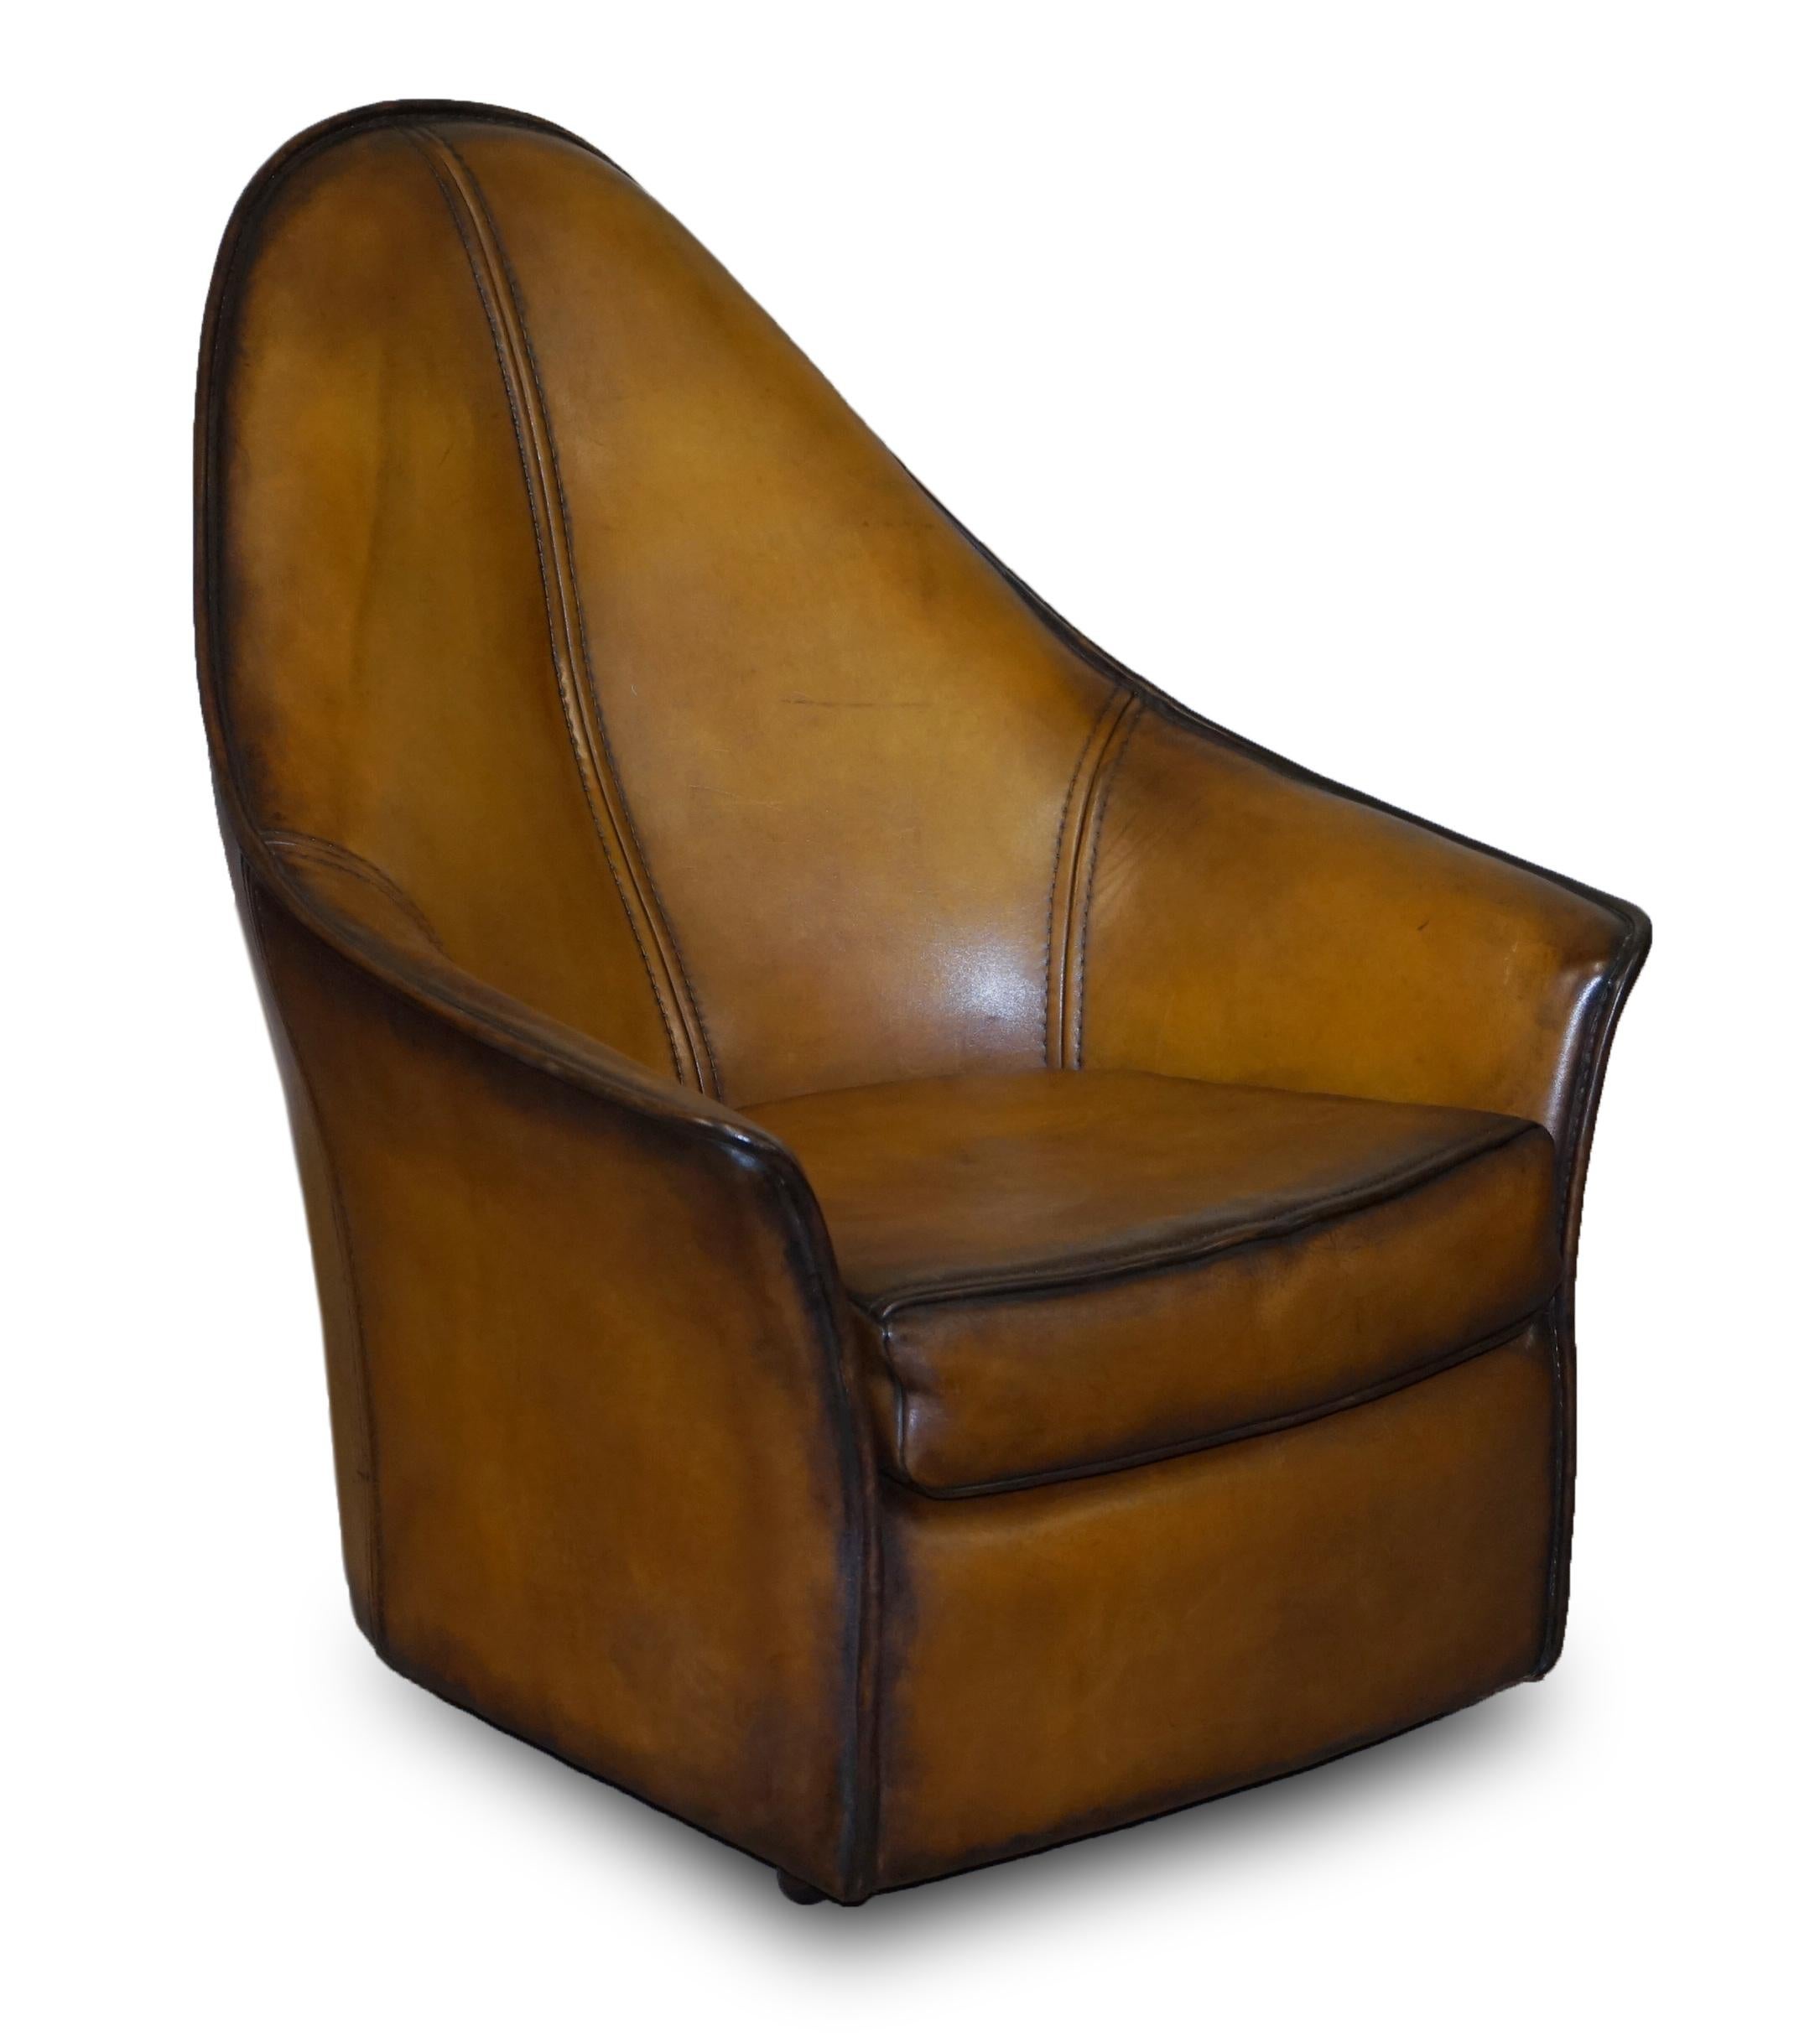 We are delighted to offer for sale this stunning pair of fully restored Vintage hand dyed Cigar brown leather Art Modern armchairs which are part of a large suite

As mentioned these are part of a suite, in total I have a pair of armchairs, a two